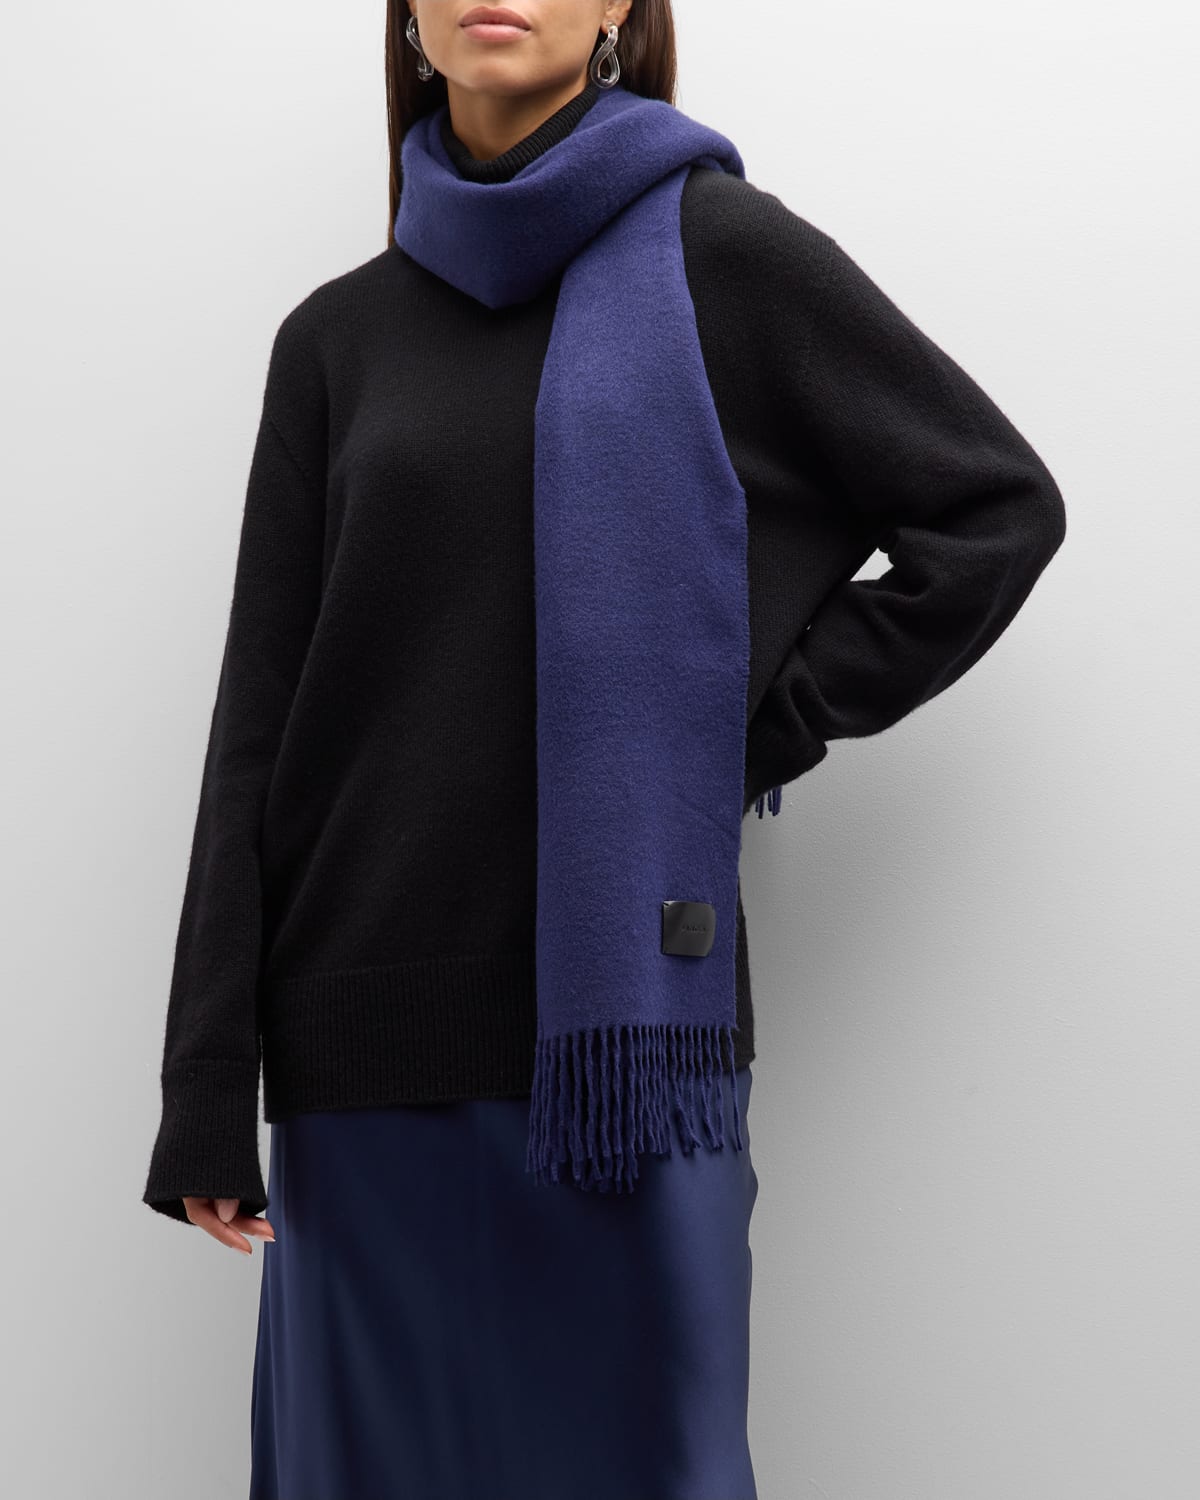 Two-Tone Double Faced Cashmere Scarf